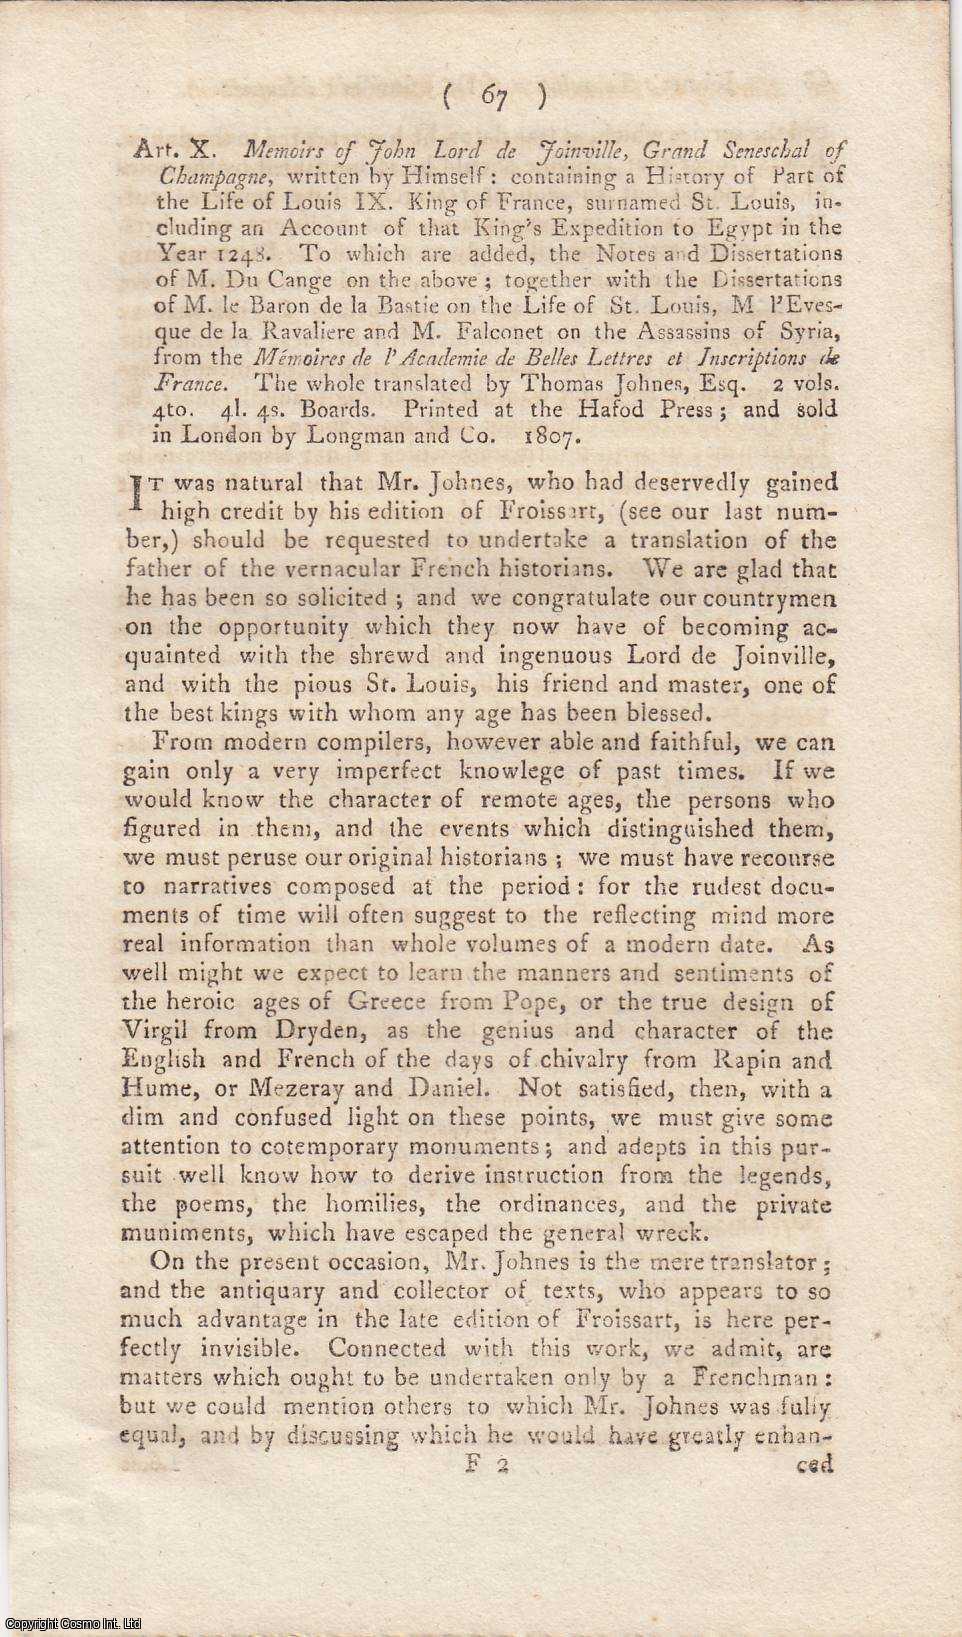 Stephen Jones - Memoirs of John Lord de Joinville, Grand Seneschal of Champagne, Written by Himself: Containing a History of Part of The Life of Louis IX. King of France Translated by Thomas Johnes. An original article from the Monthly Review, 1808.